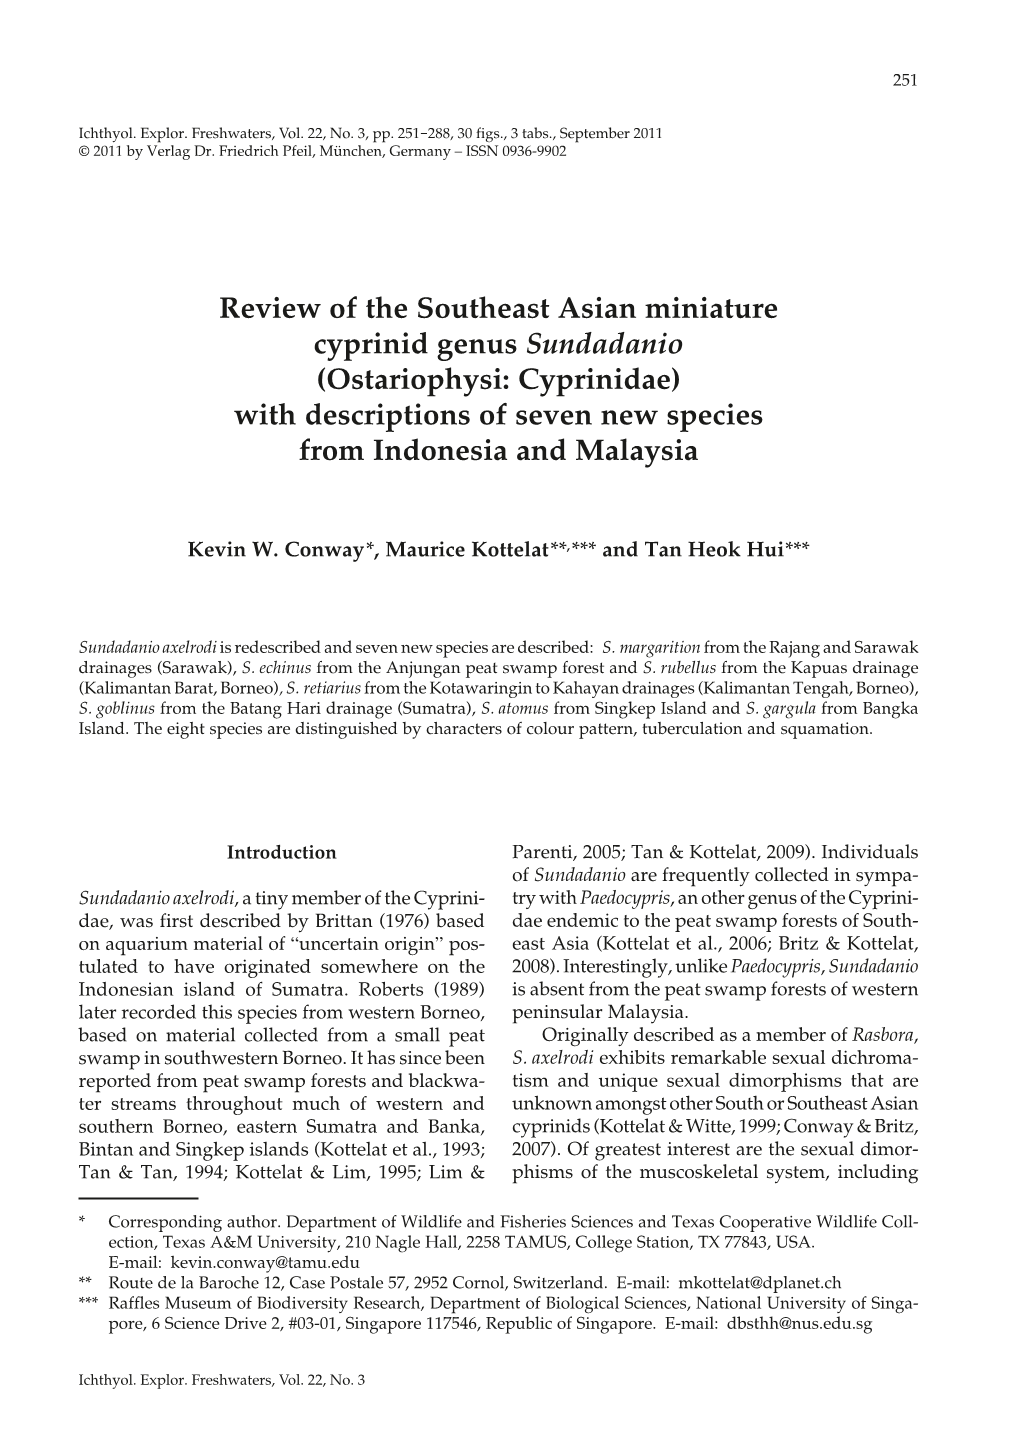 Review of the Southeast Asian Miniature Cyprinid Genus Sundadanio (Ostariophysi: Cyprinidae) with Descriptions of Seven New Species from Indonesia and Malaysia